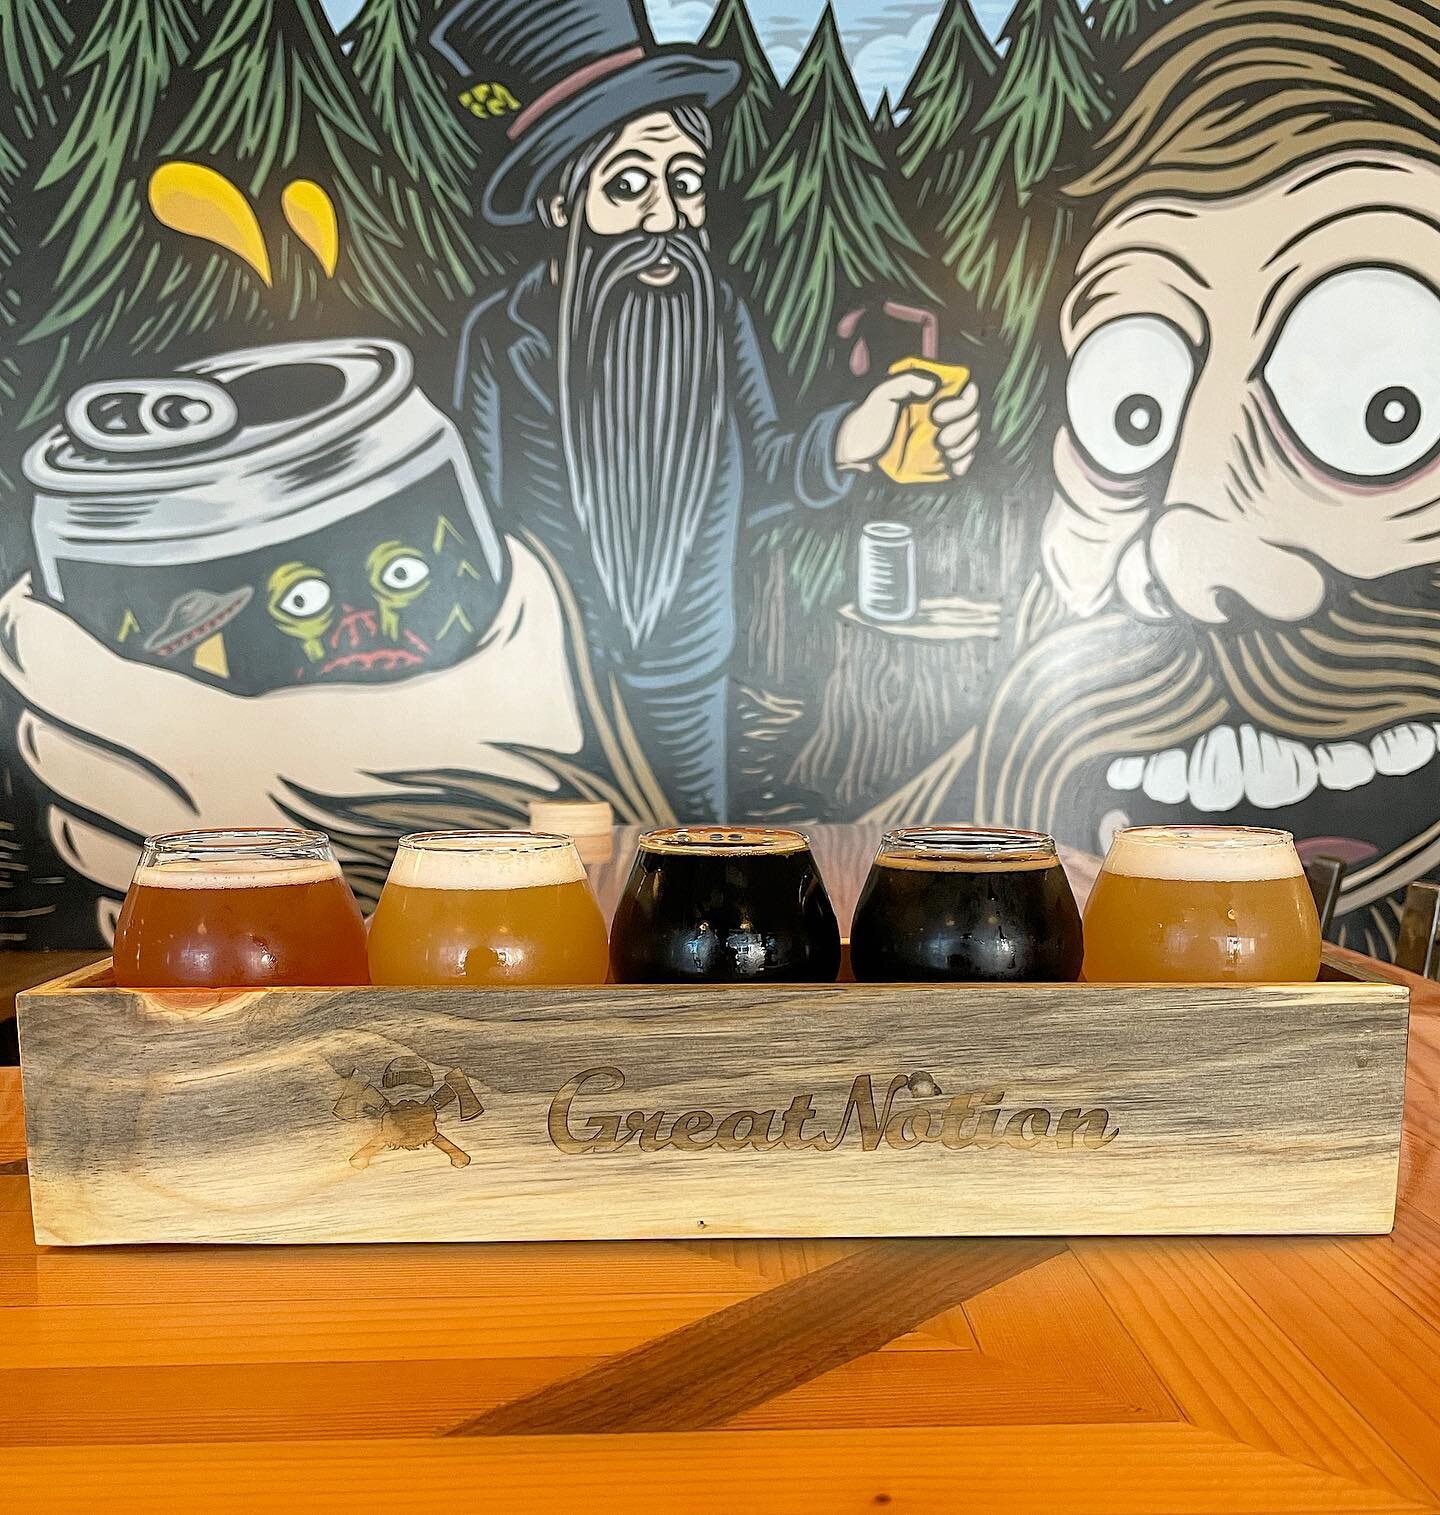 🚨 New blog is up: my beer &amp; travel guide for Portland, Oregon! 🥳 Check out the link in my bio or in my stories to see all of my PDX recommendations! 👀 I of course had to check out the other central Portland Great Notion location while I was vi